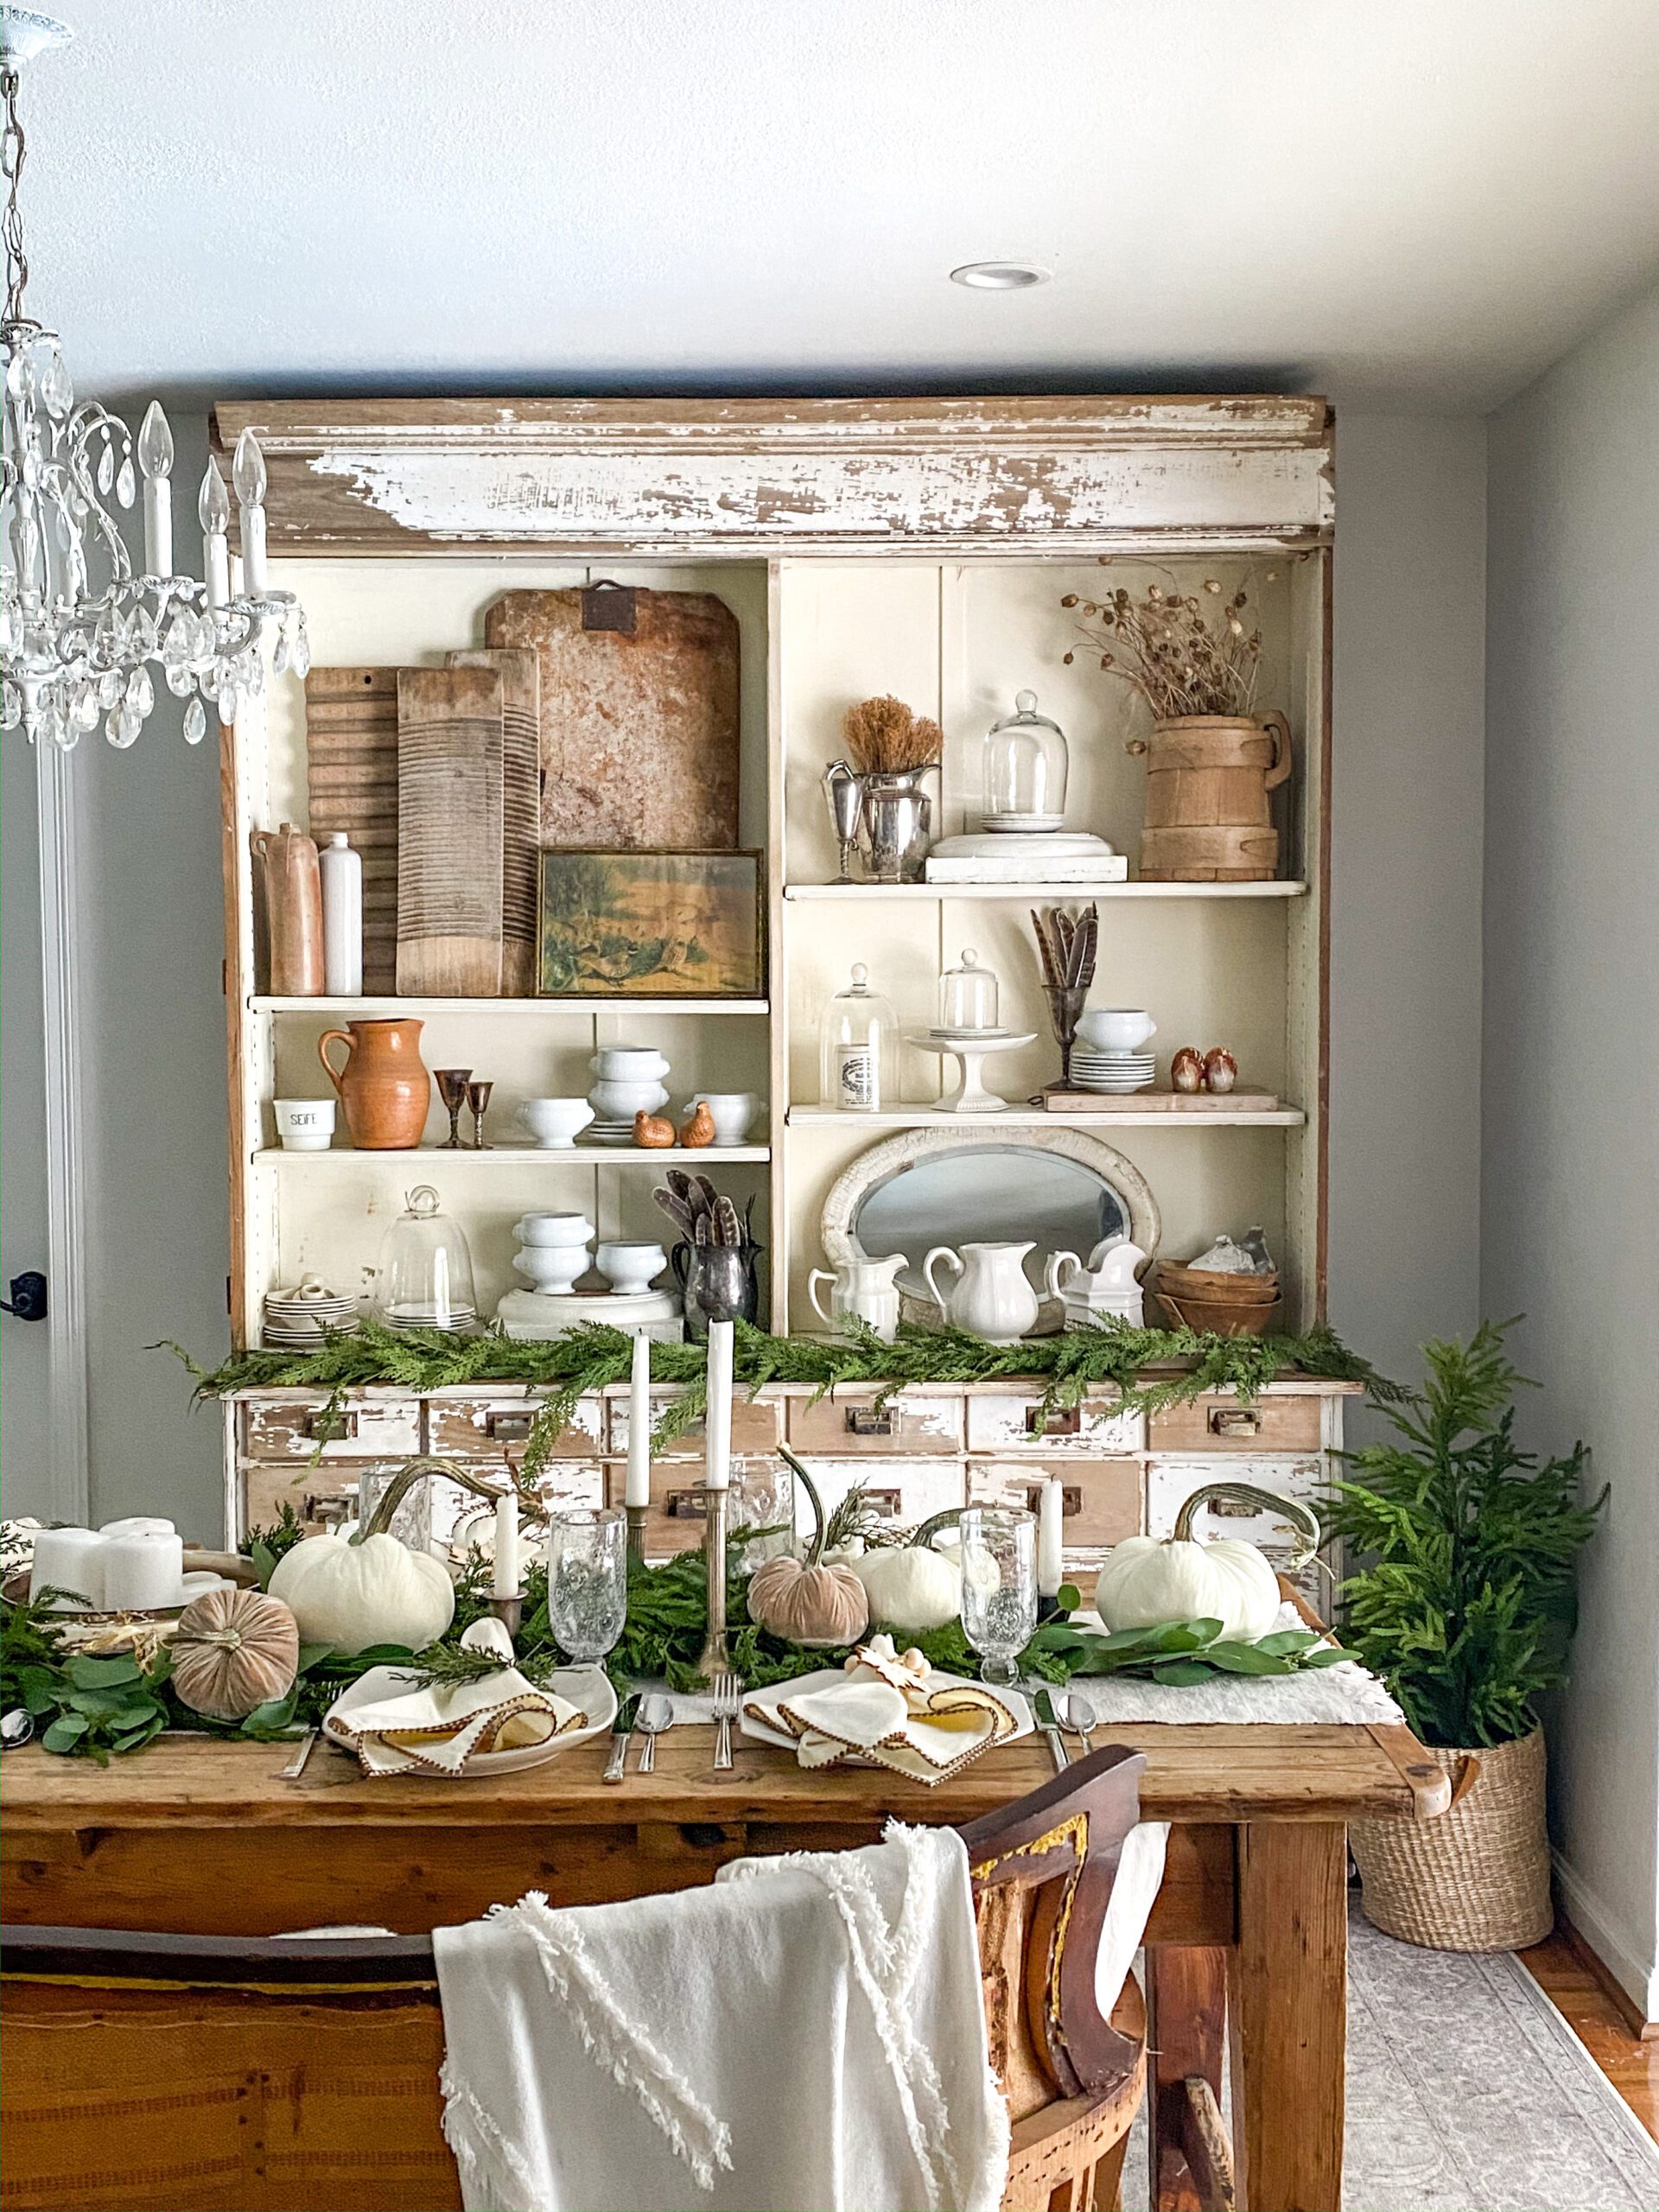 How to Create a Beautiful Thanksgiving Tablescape